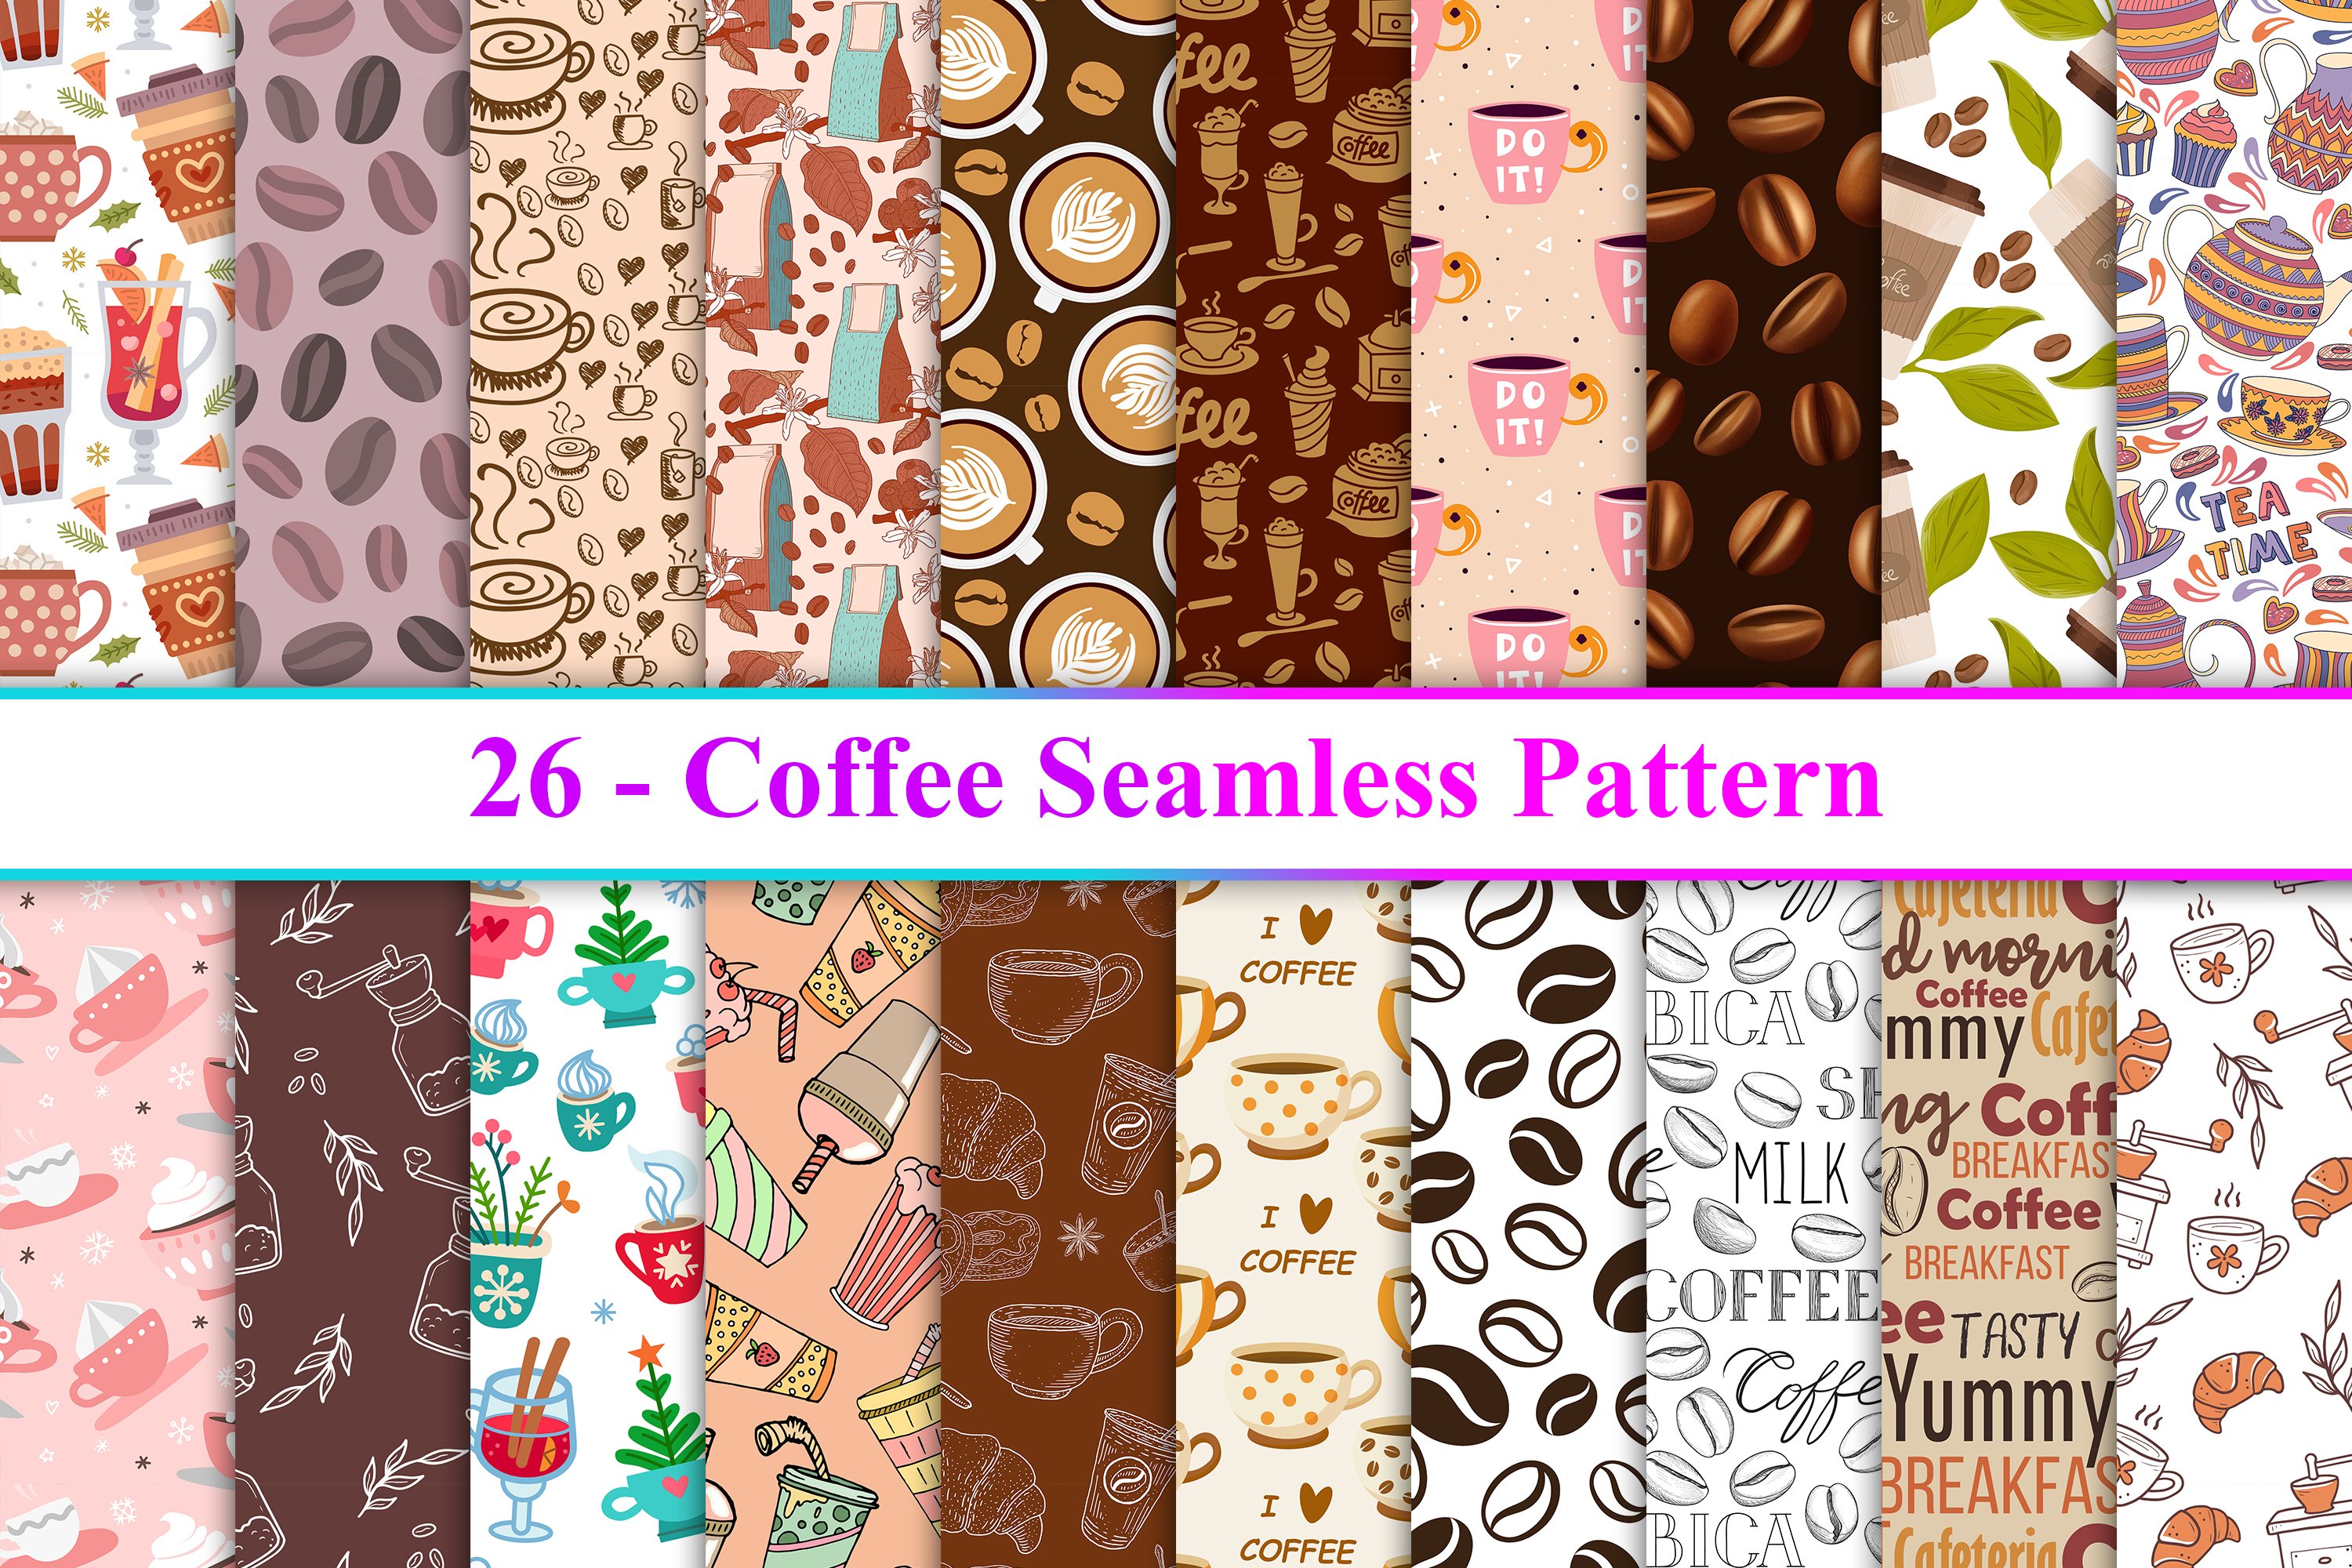 Coffee Seamless Pattern cover image.